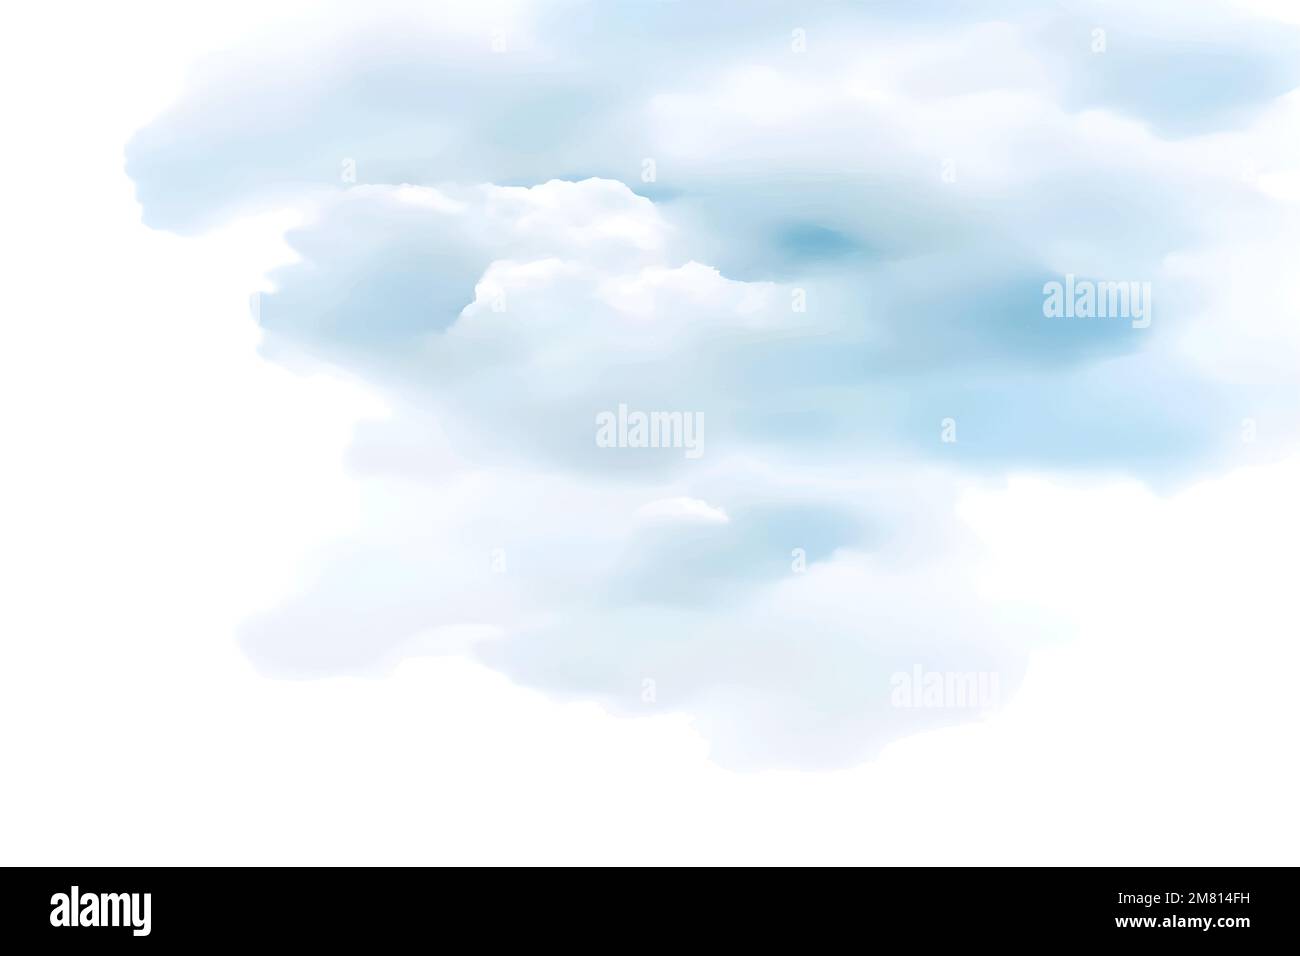 Handmade illustration of blue clouds, sky watercolor, light abstract splash on white paper background, vector watercolor clouds. Stock Vector